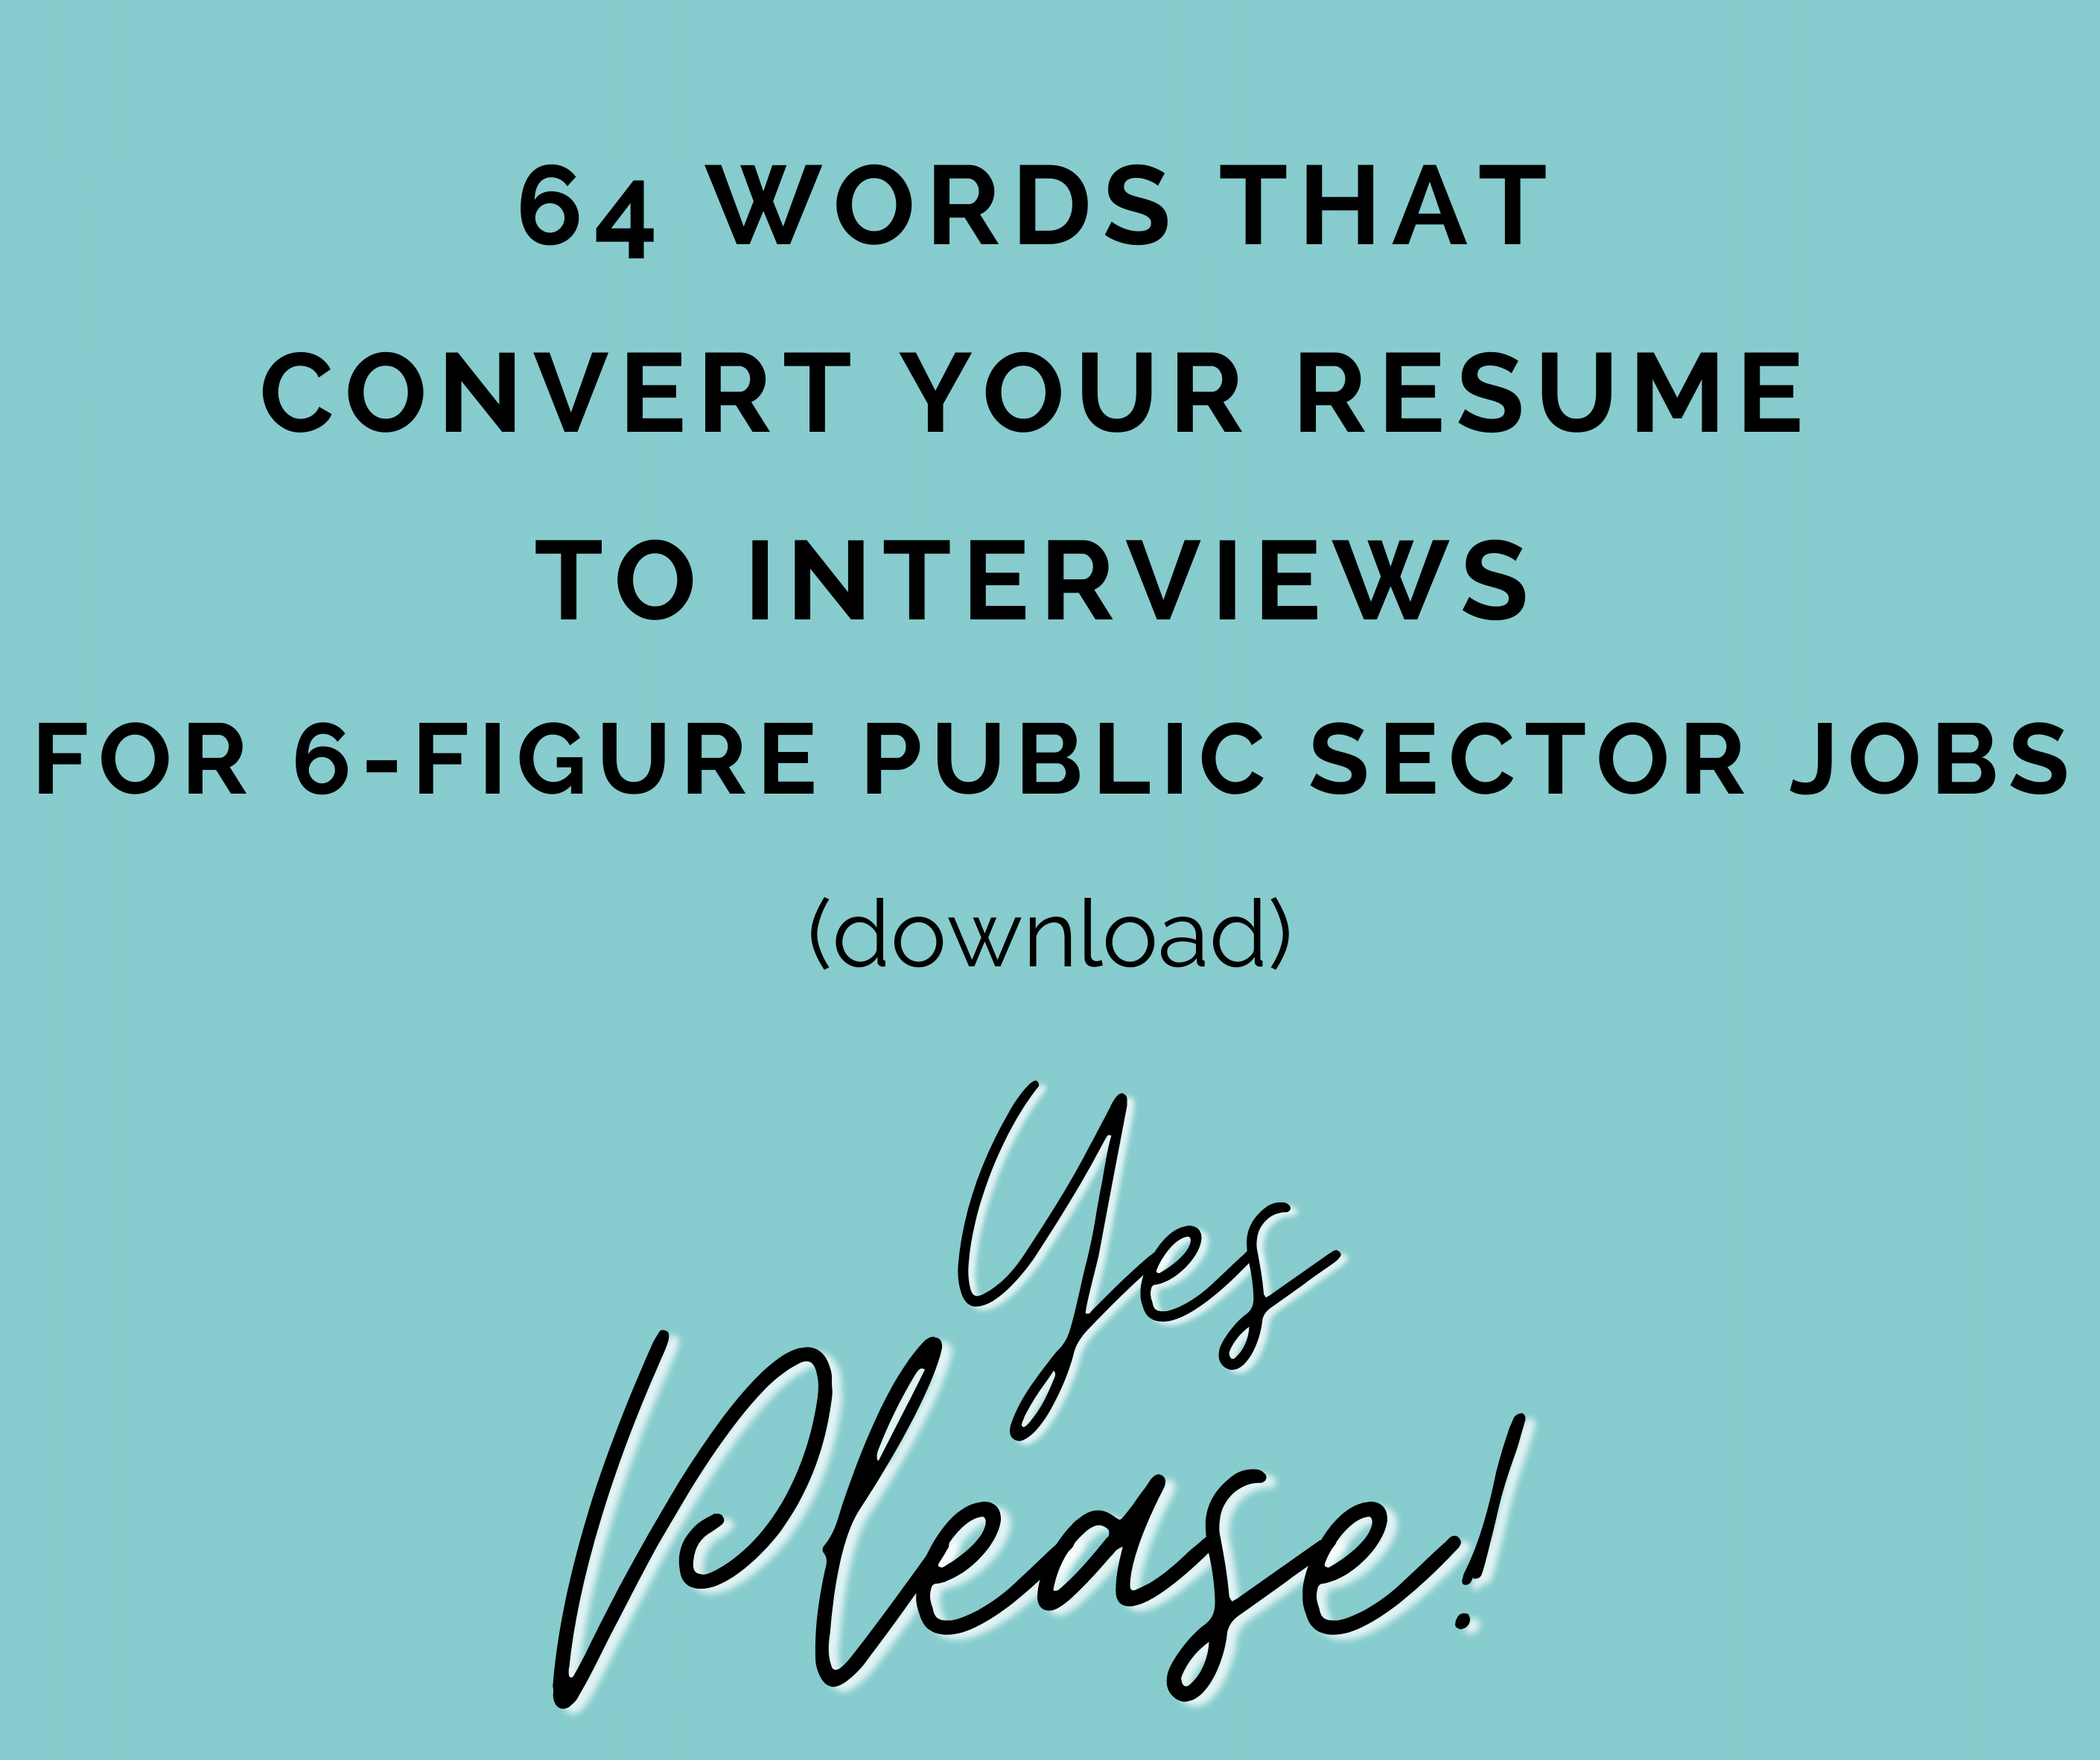 64 words that convert your resume to interviews for 6-figure public sector jobs